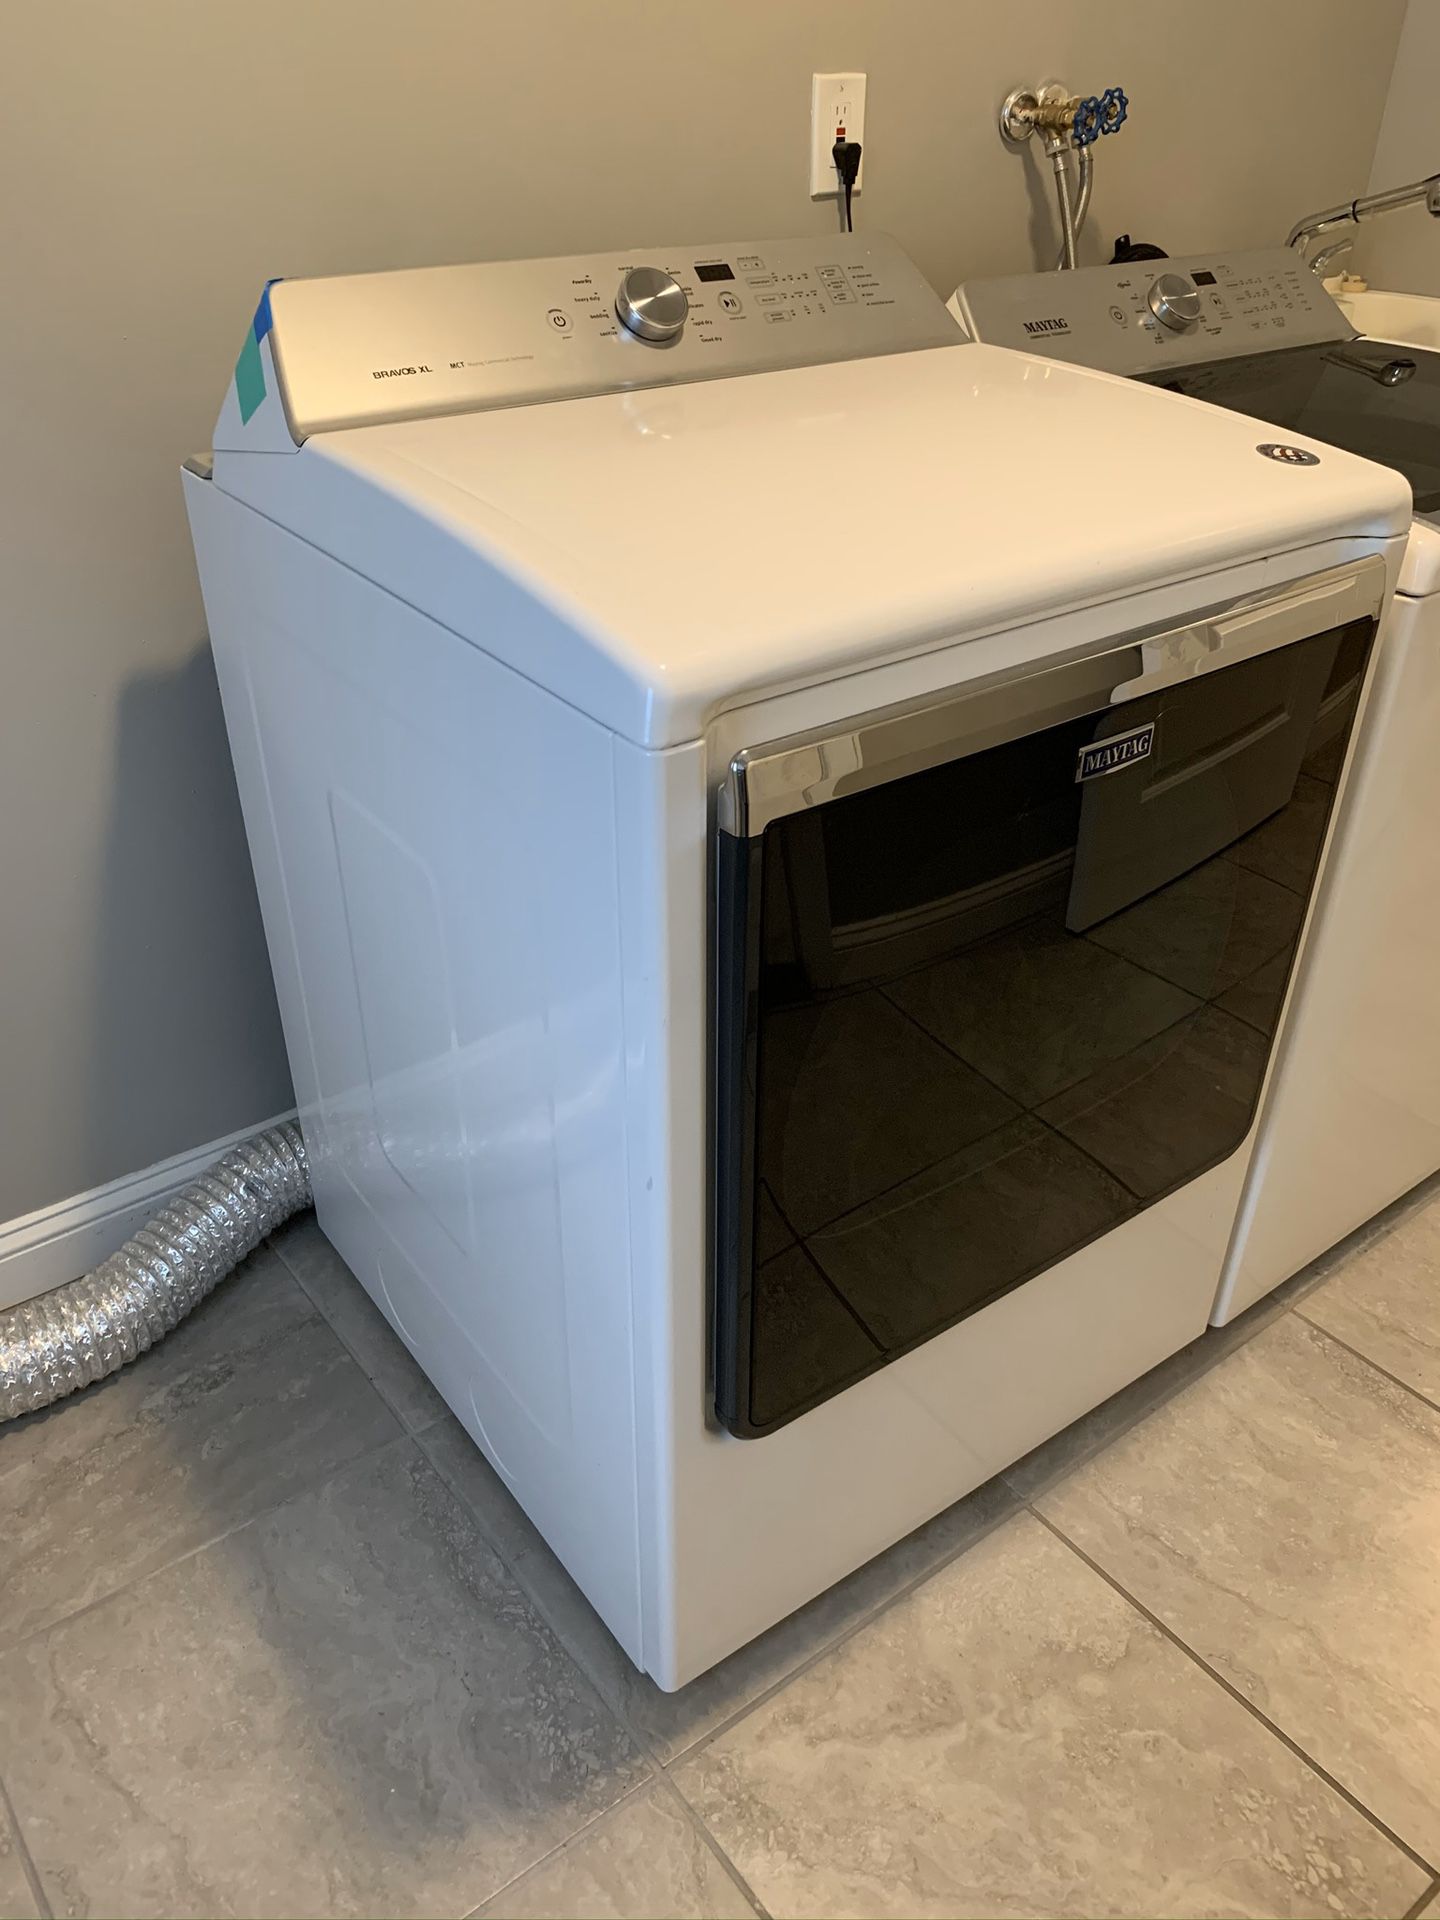 Maytag BRAVO XL Washer and Dryer (electric)